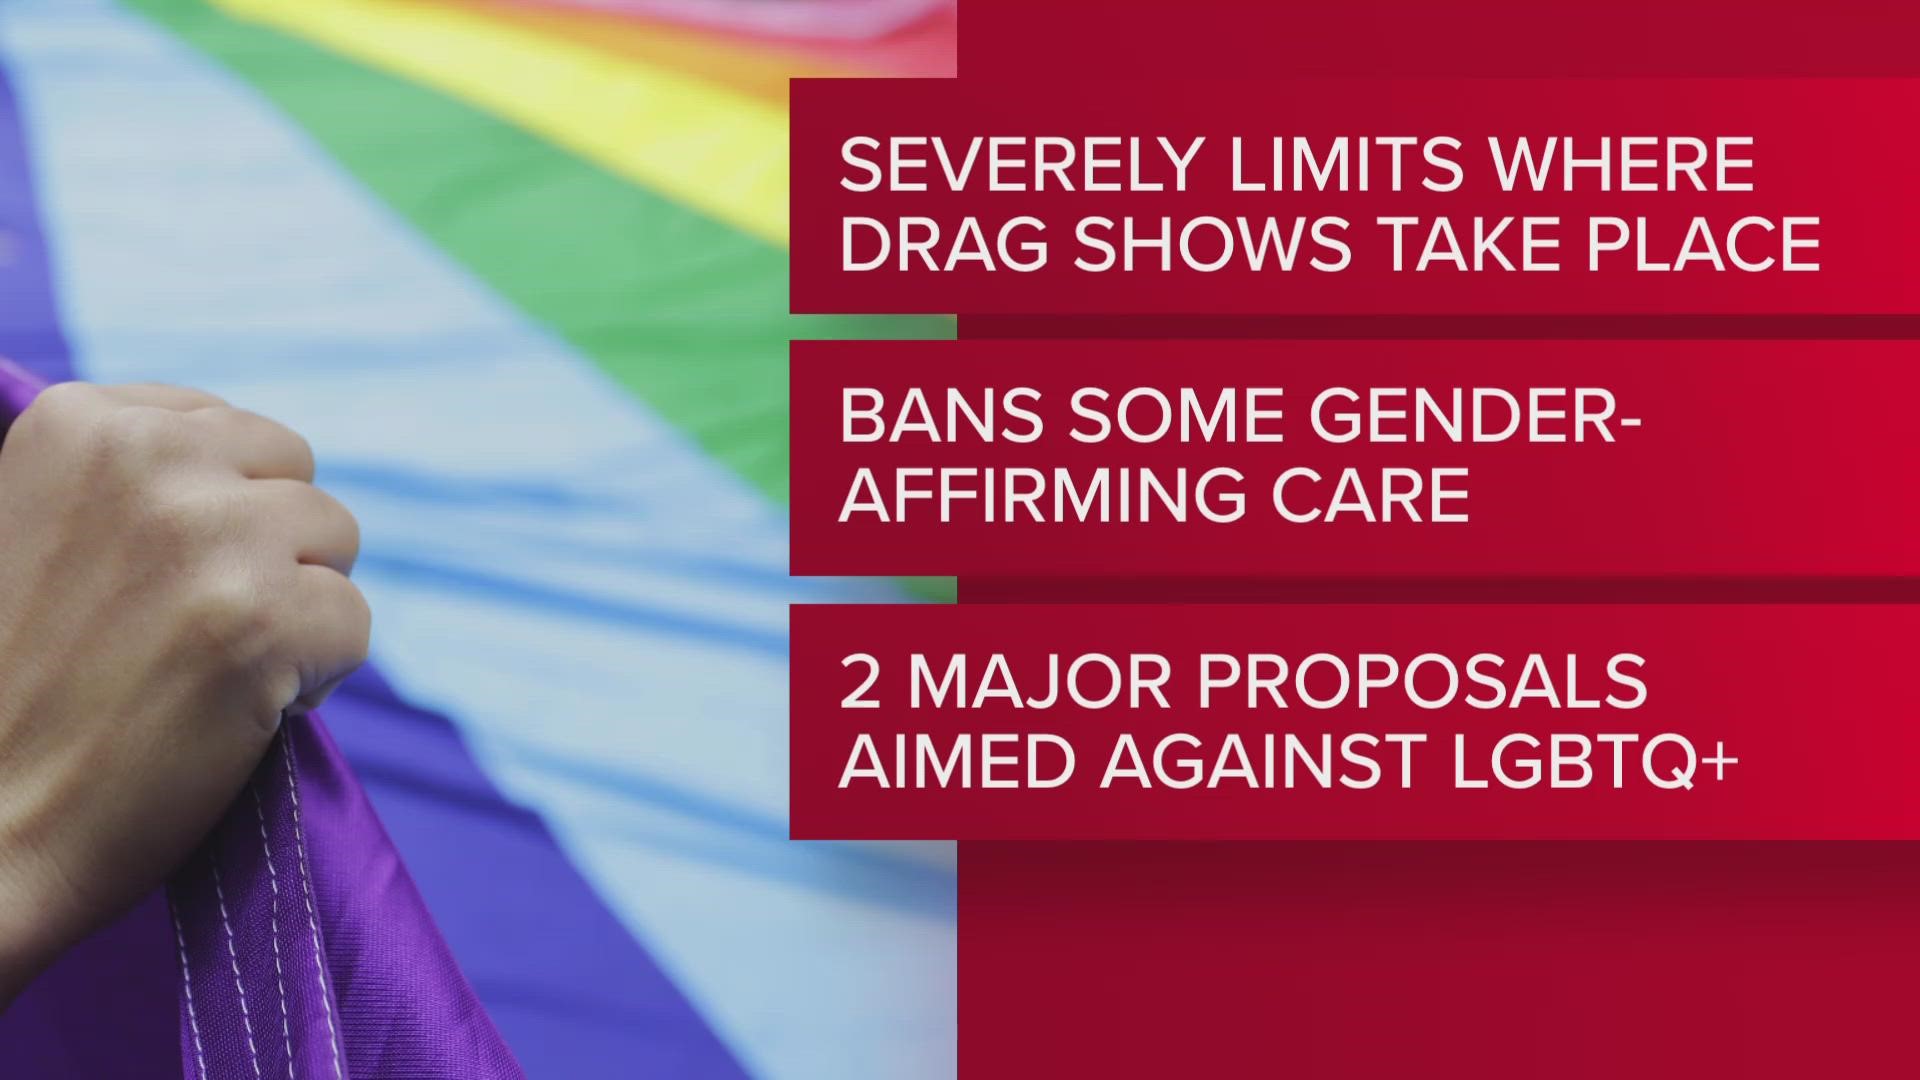 The bills mark two major proposals targeting the LGBTQ community that Tennessee lawmakers have passed this legislative session.